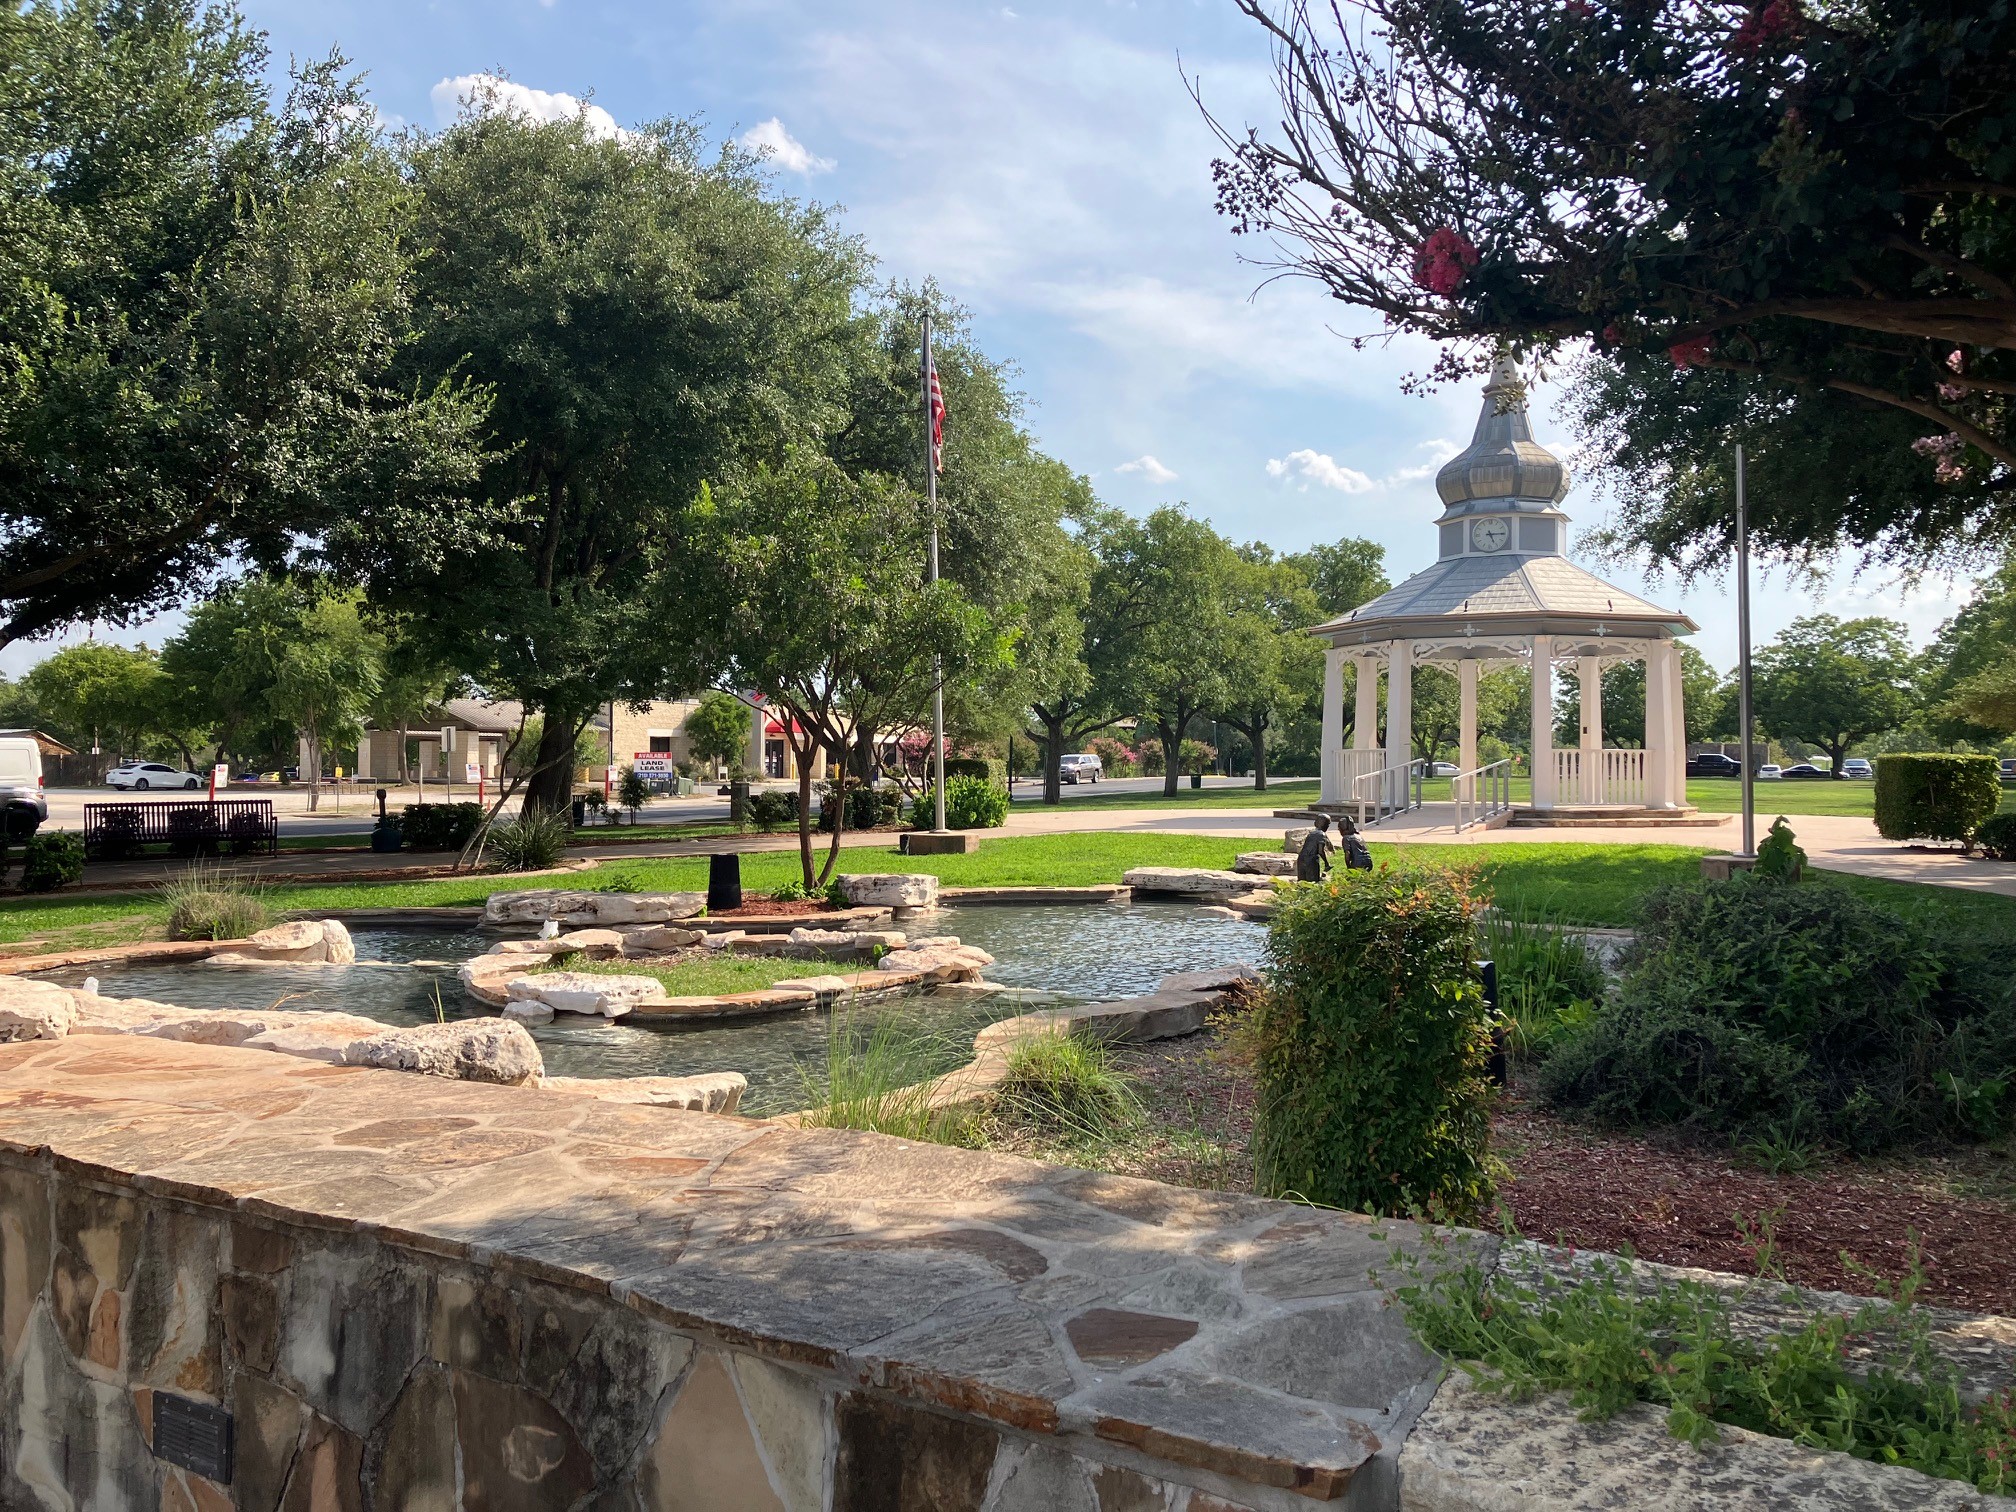 Top 5 Places in Boerne, Texas to Get Free Public Wi-Fi